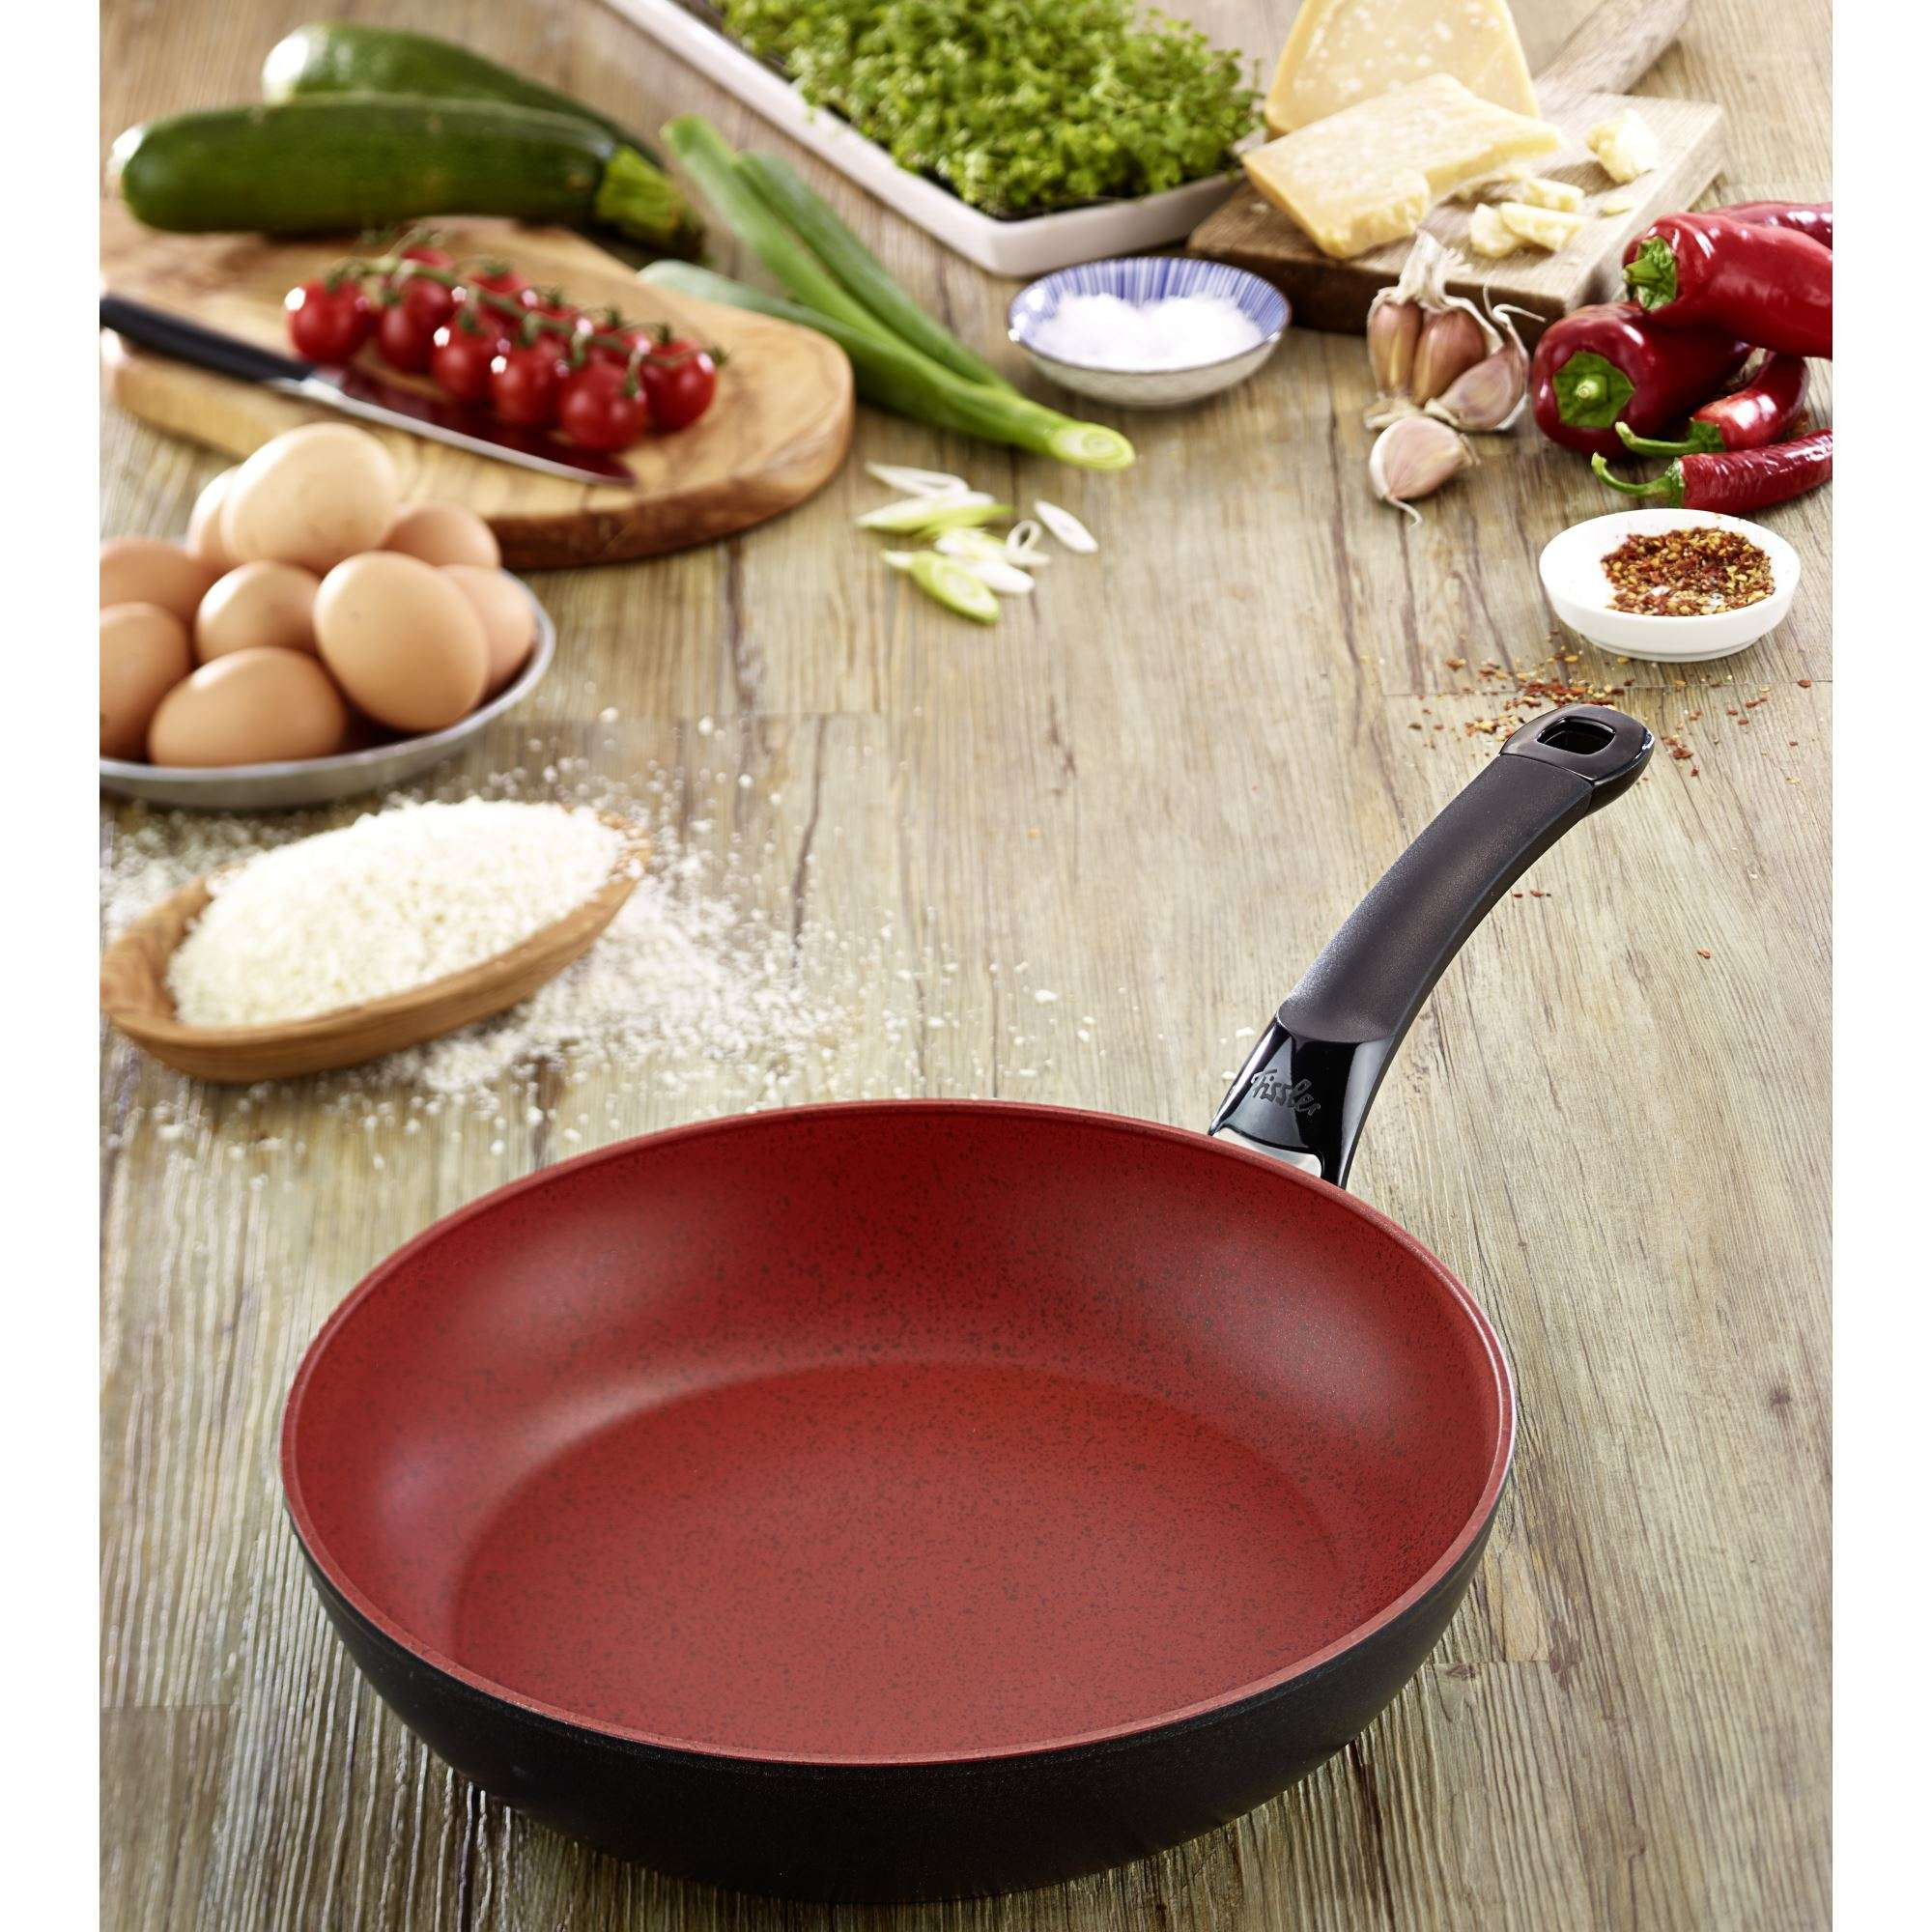 14 Fantastic Kaiser Germany Vase 2024 free download kaiser germany vase of fissler protect frying pan sensored 26 cm new product induction with regard to fissler protect frying pan sensored 26 cm new product induction frying pans frying cooki